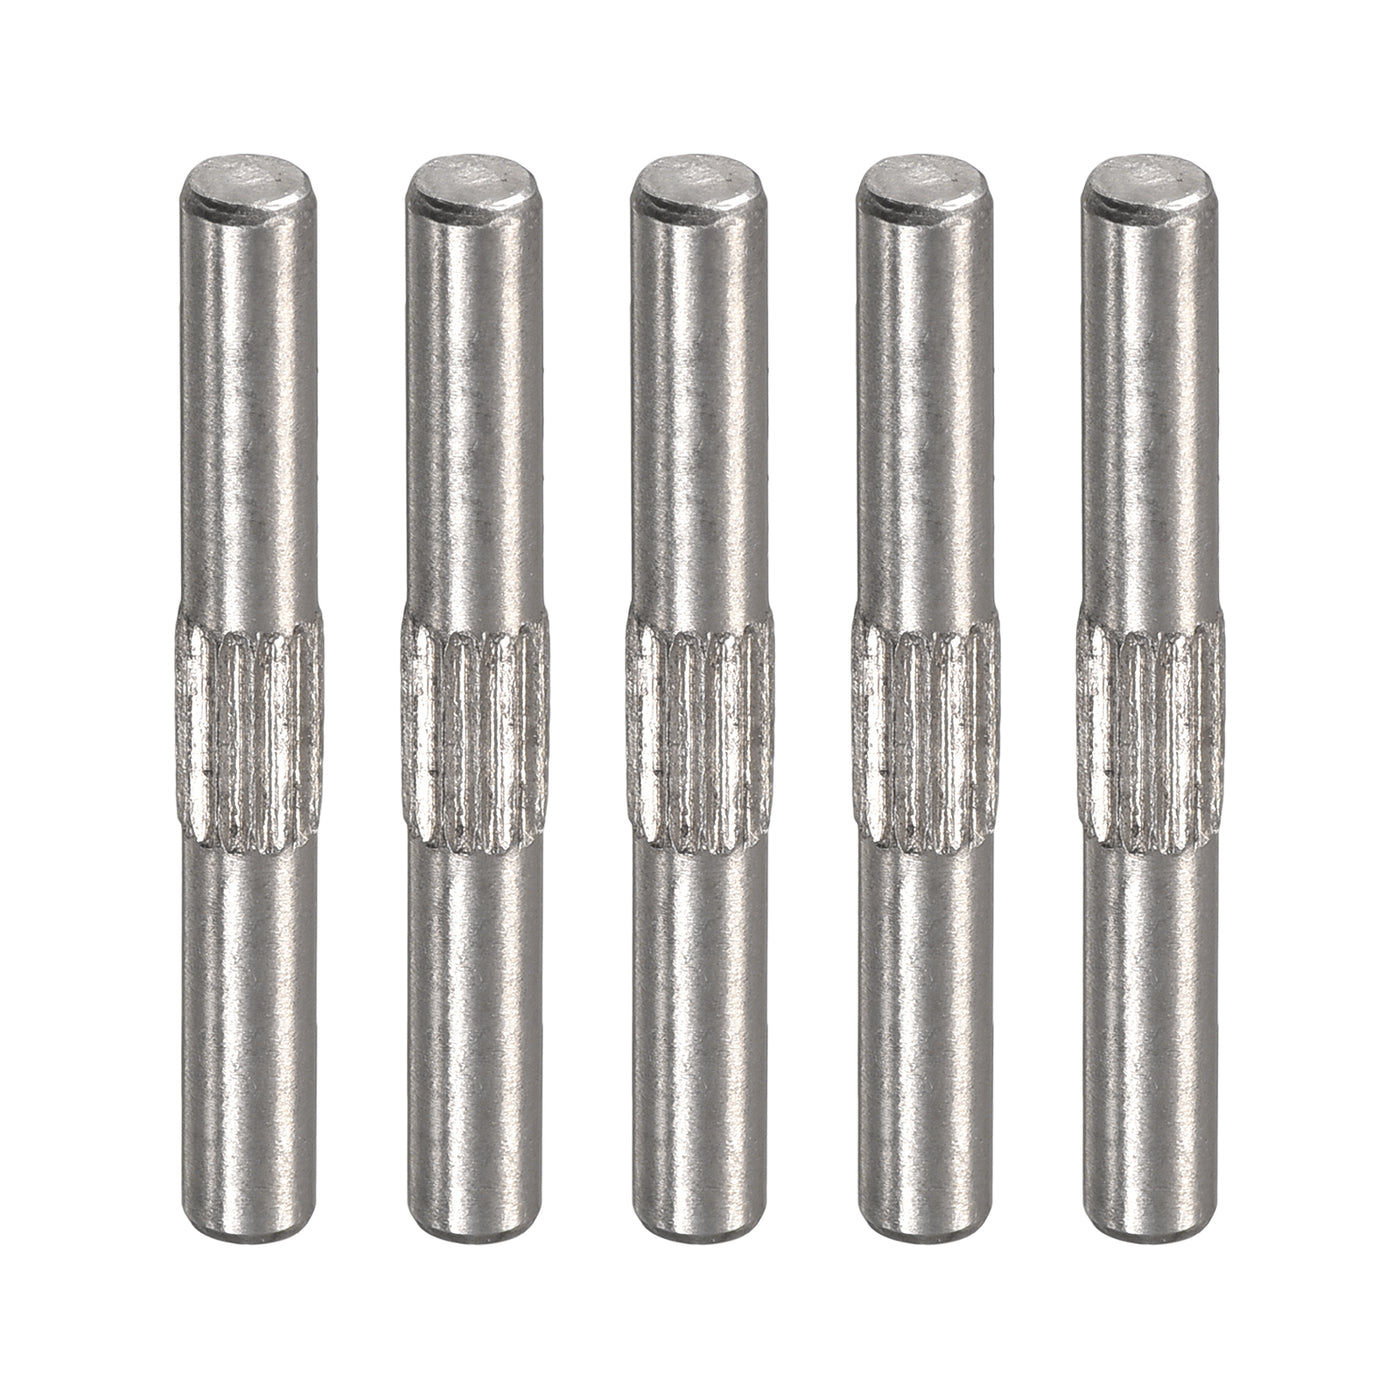 uxcell Uxcell 3x25mm 304 Stainless Steel Dowel Pins, 5Pcs Center Knurled Chamfered End Pin